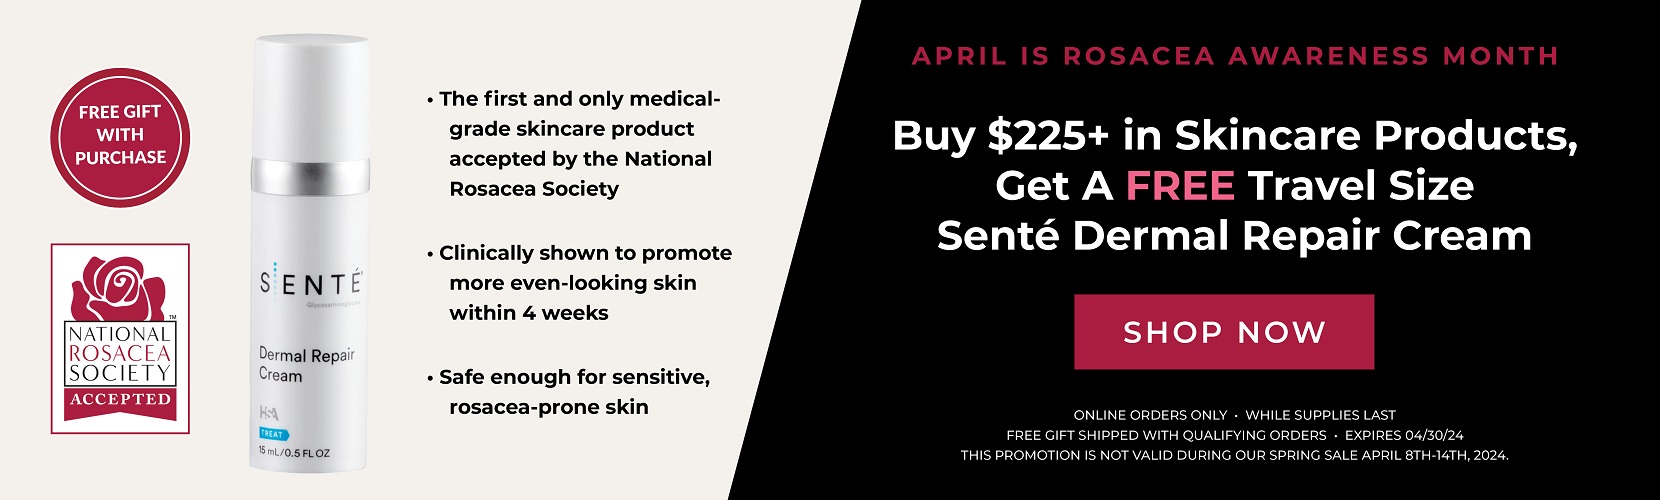 Buy $225+ in Skincare Products, Get A FREE Travel Size Senté Dermal Repair Cream